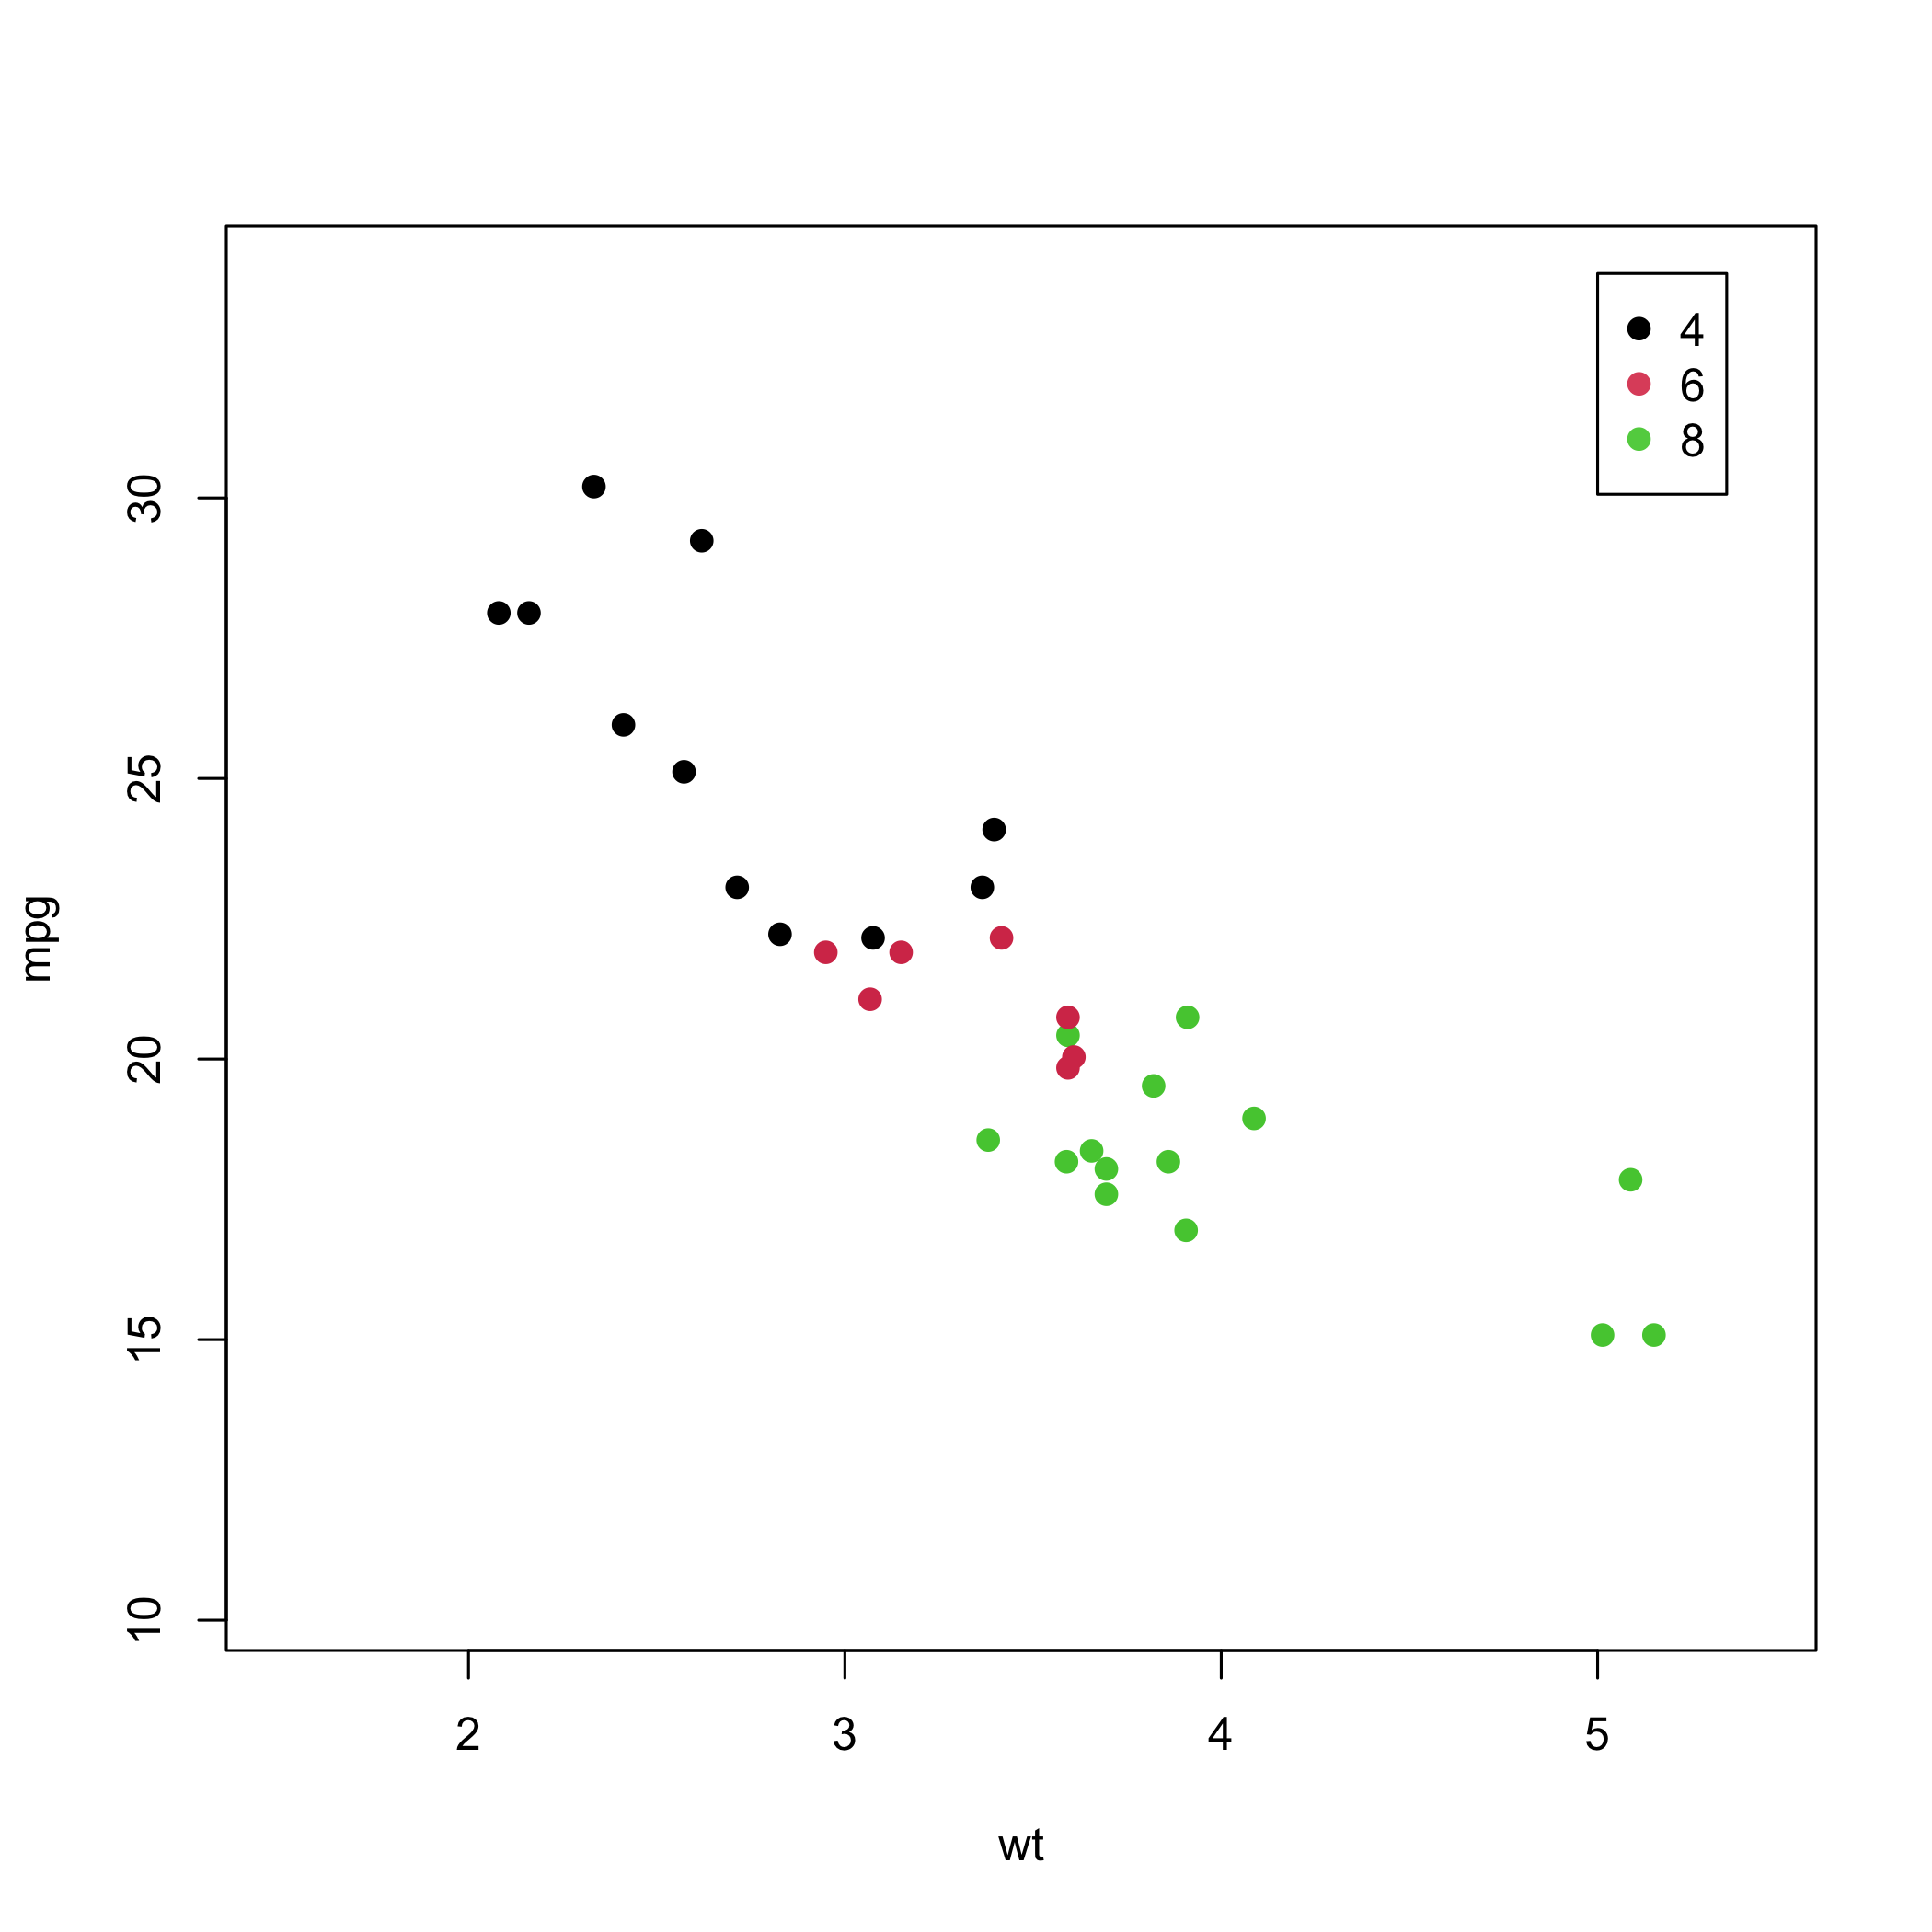 How To Partially Rasterize A Figure Plotted With R Jonathan Chang